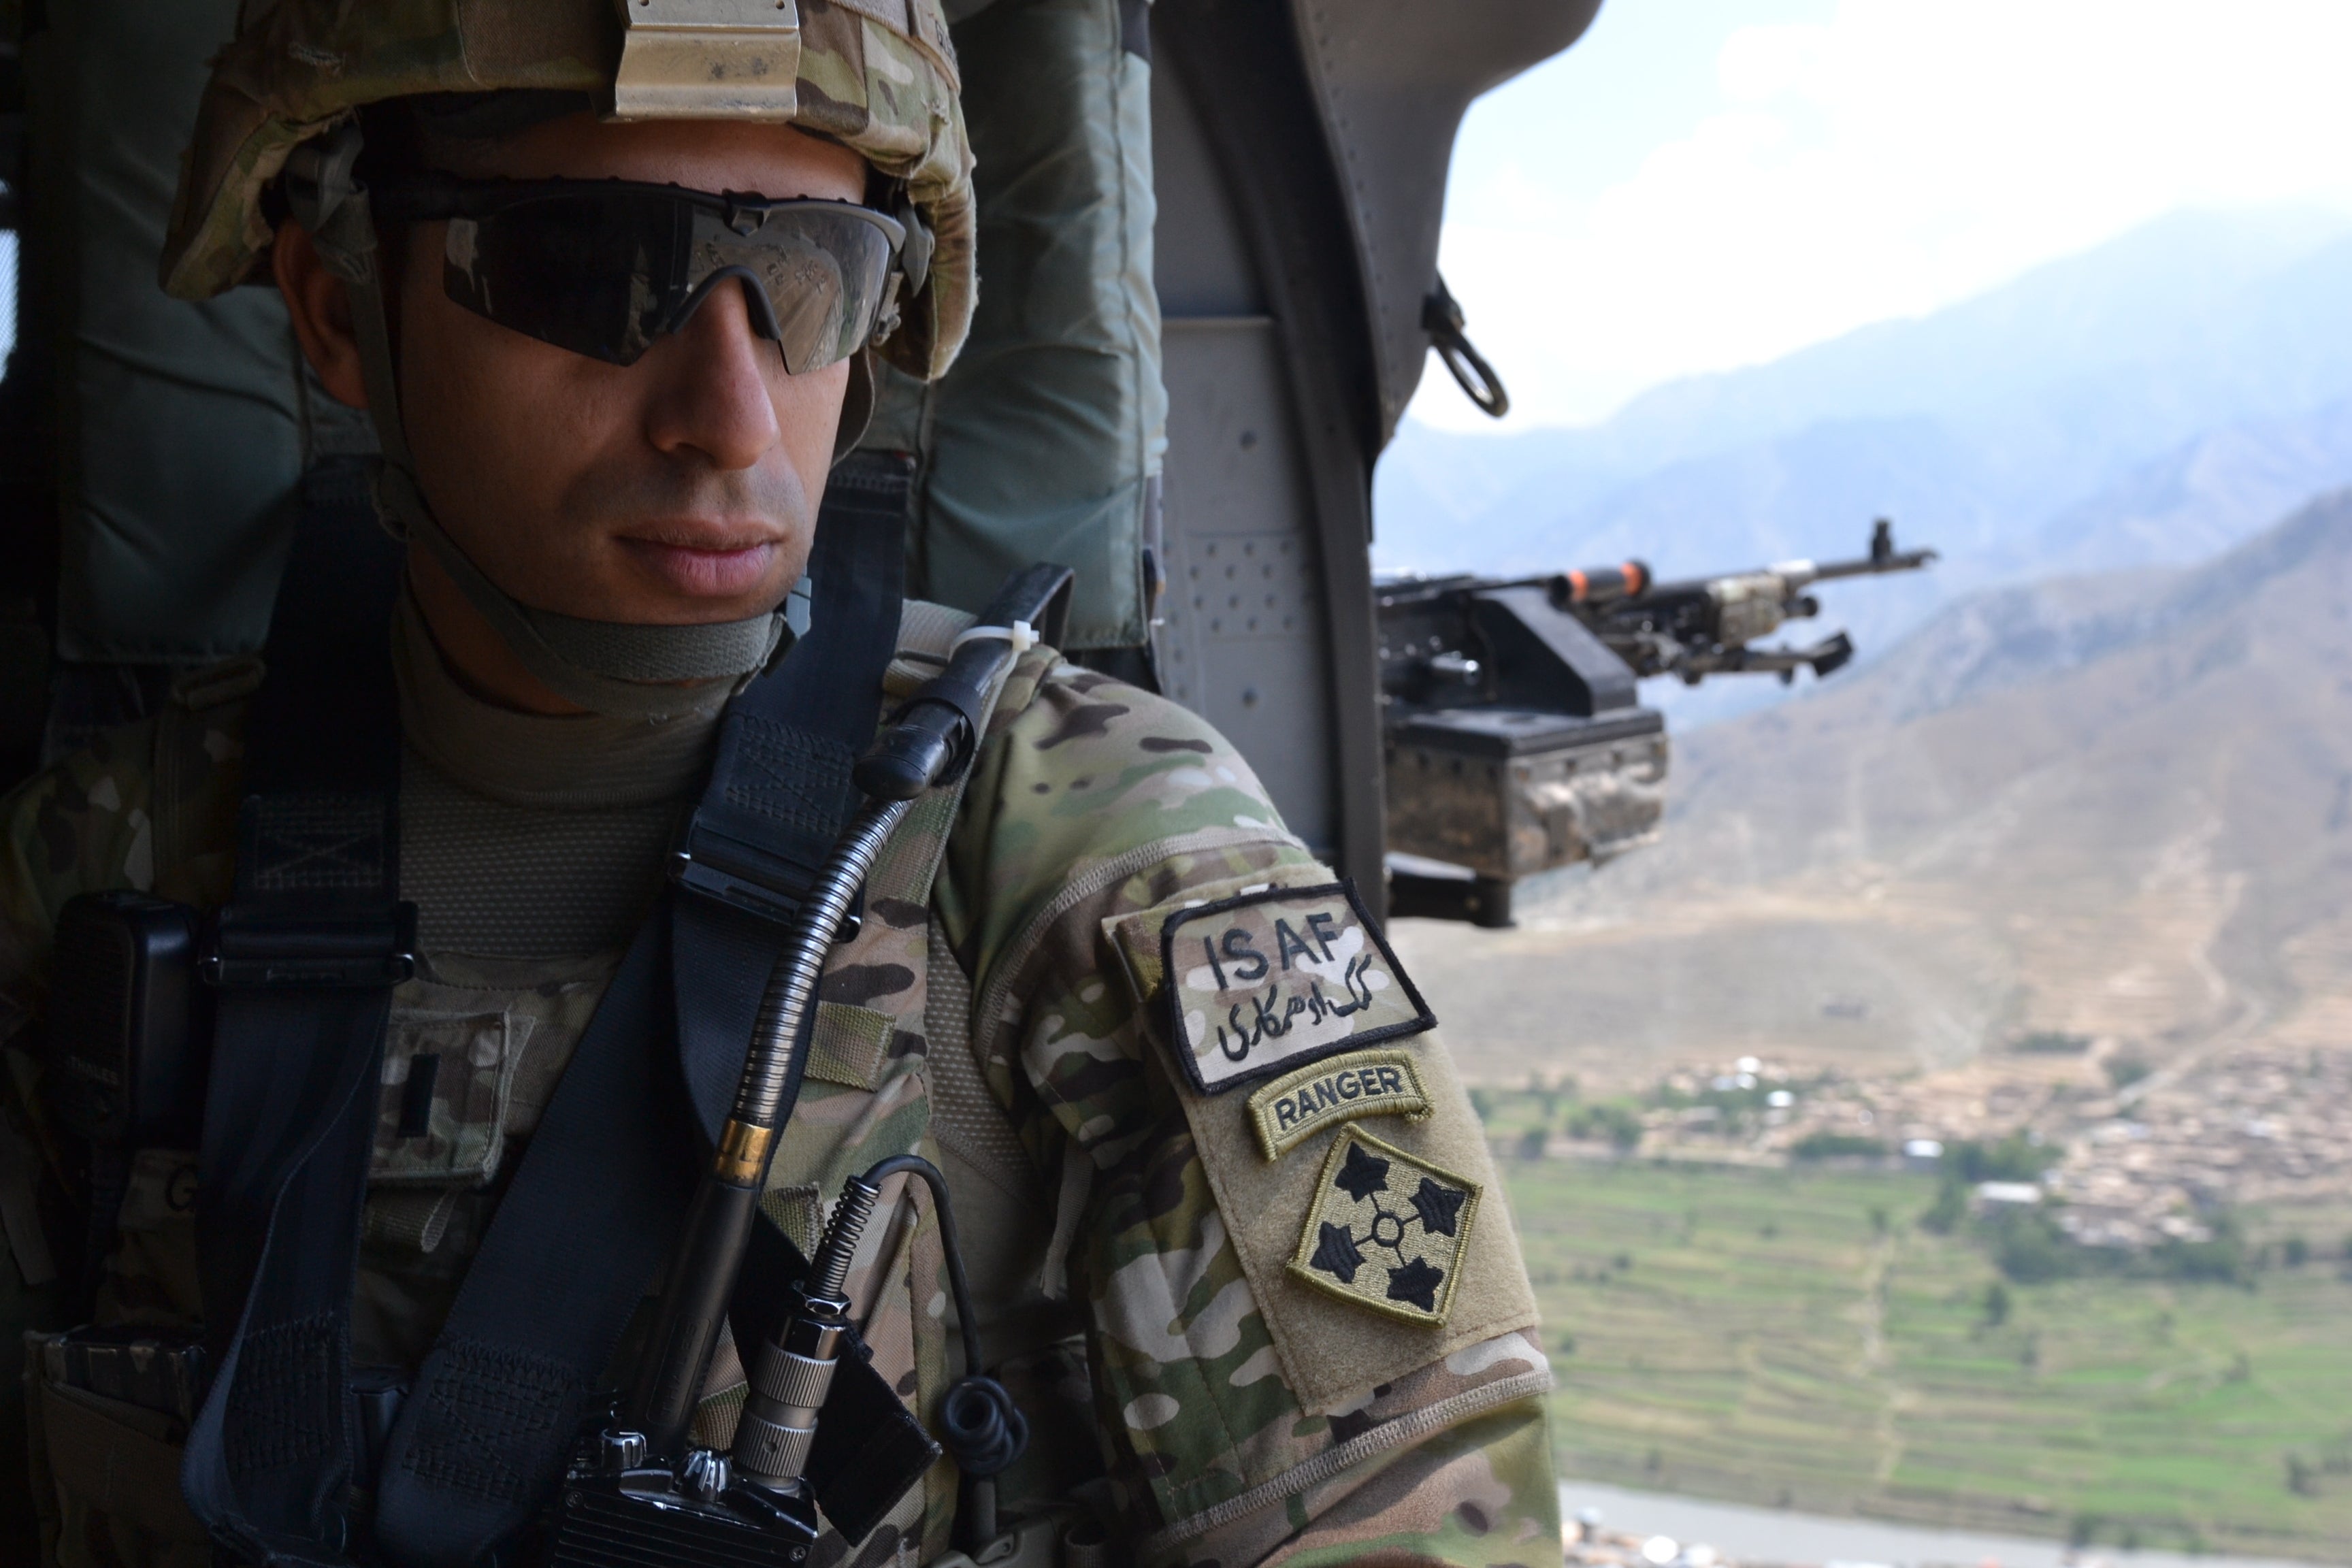 Army Ranger receives Medal of Honor 